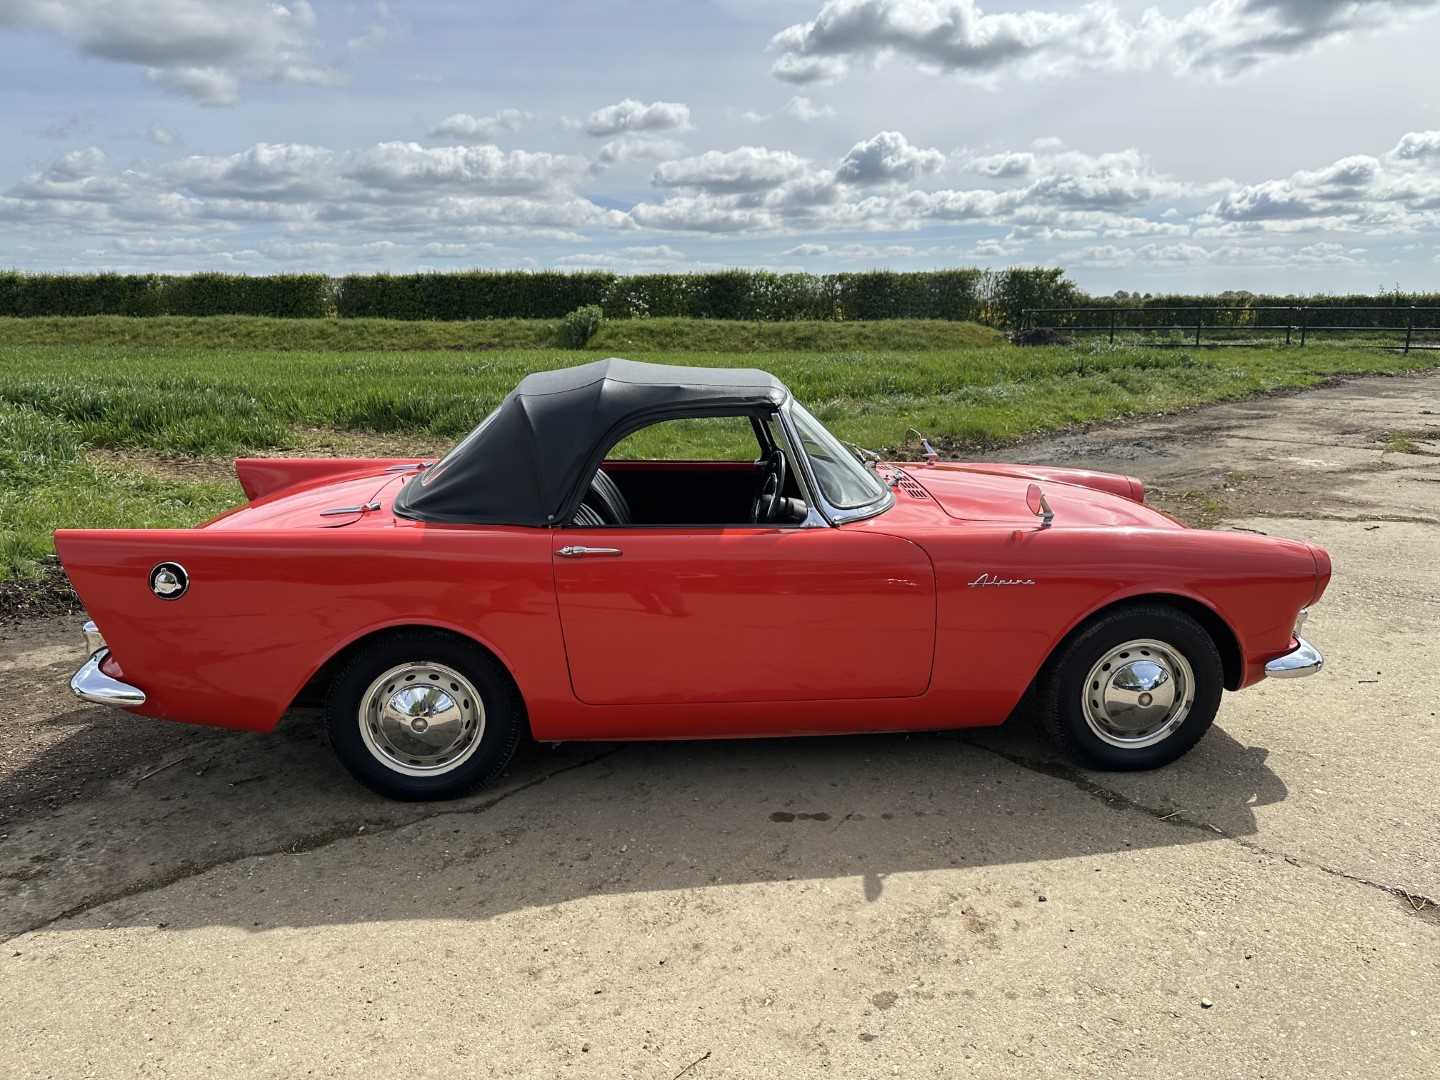 1960 Sunbeam Alpine sports convertible, 1600cc engine, manual gearbox with overdrive, reg. no. 3685 - Image 11 of 30